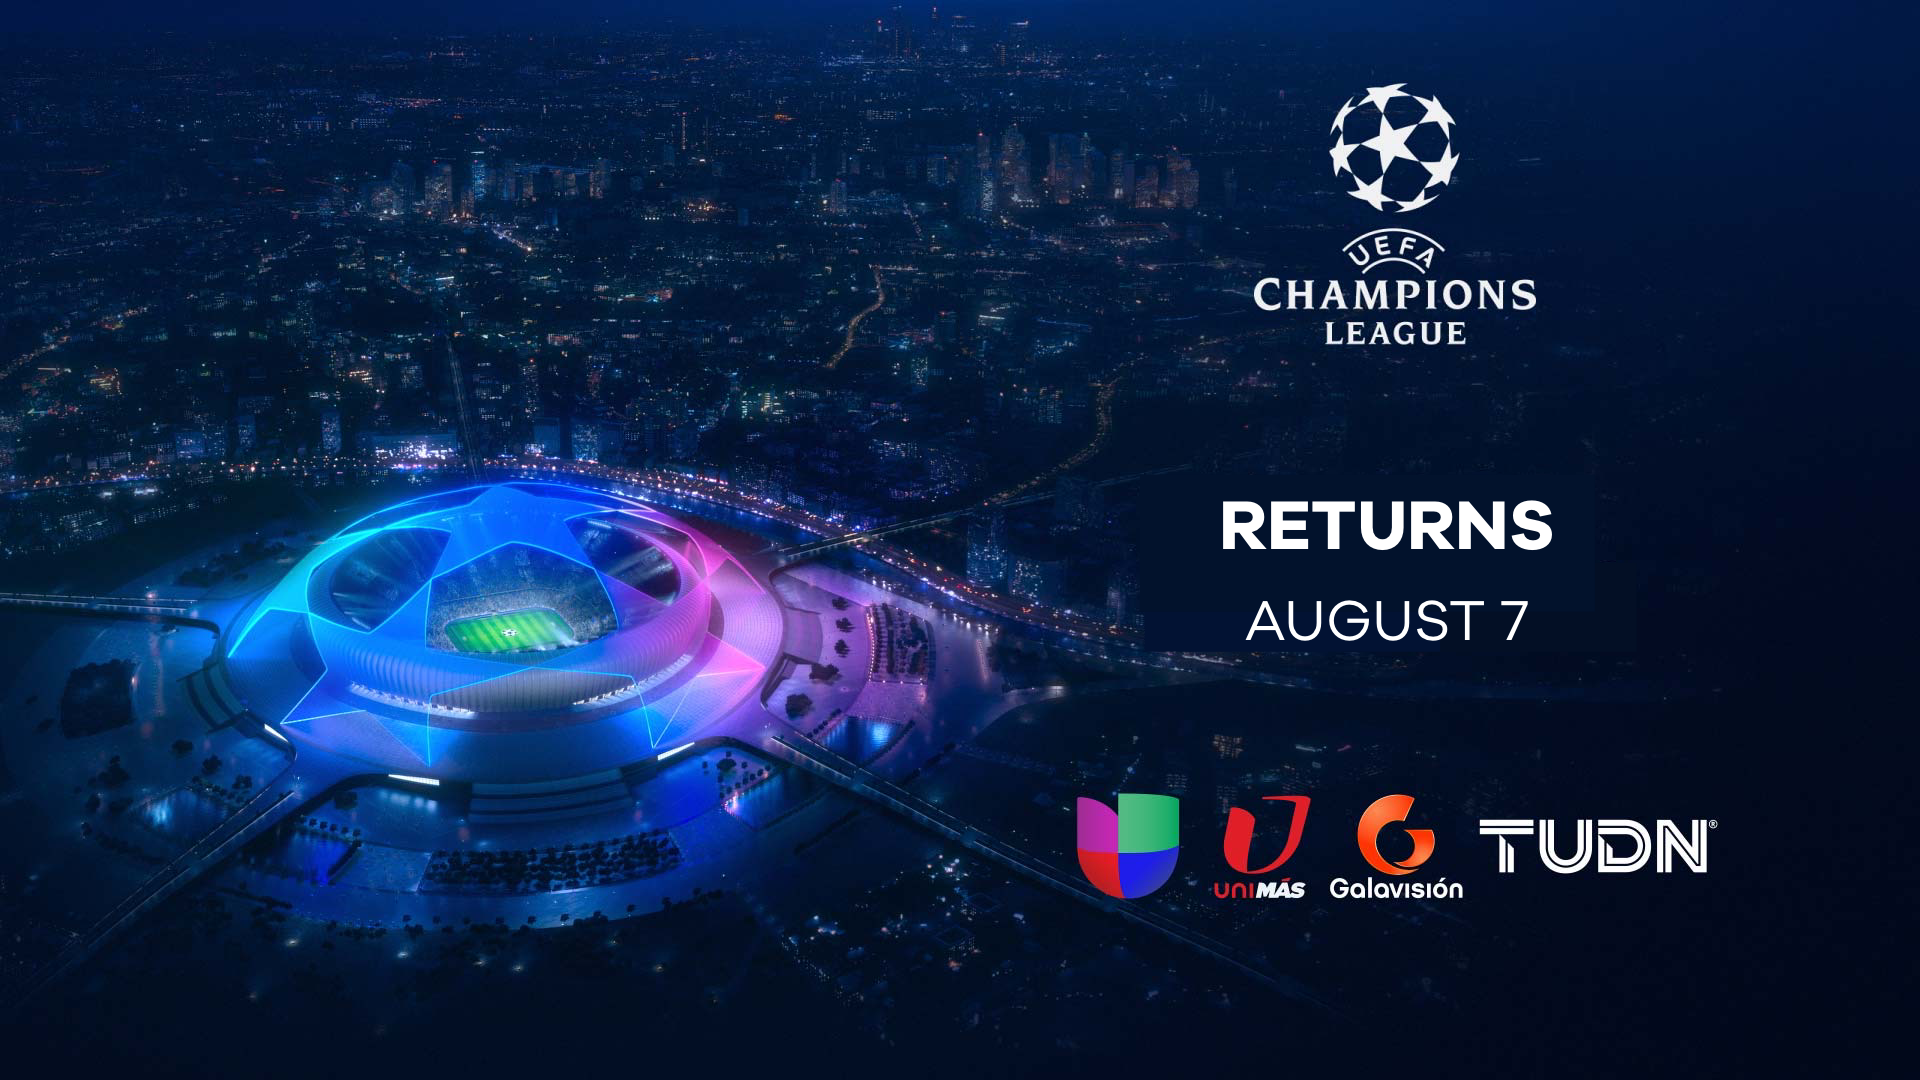 Univision's Brings the UEFA Champions 2019-20 Season to Broadcast Cable Television - TelevisaUnivision